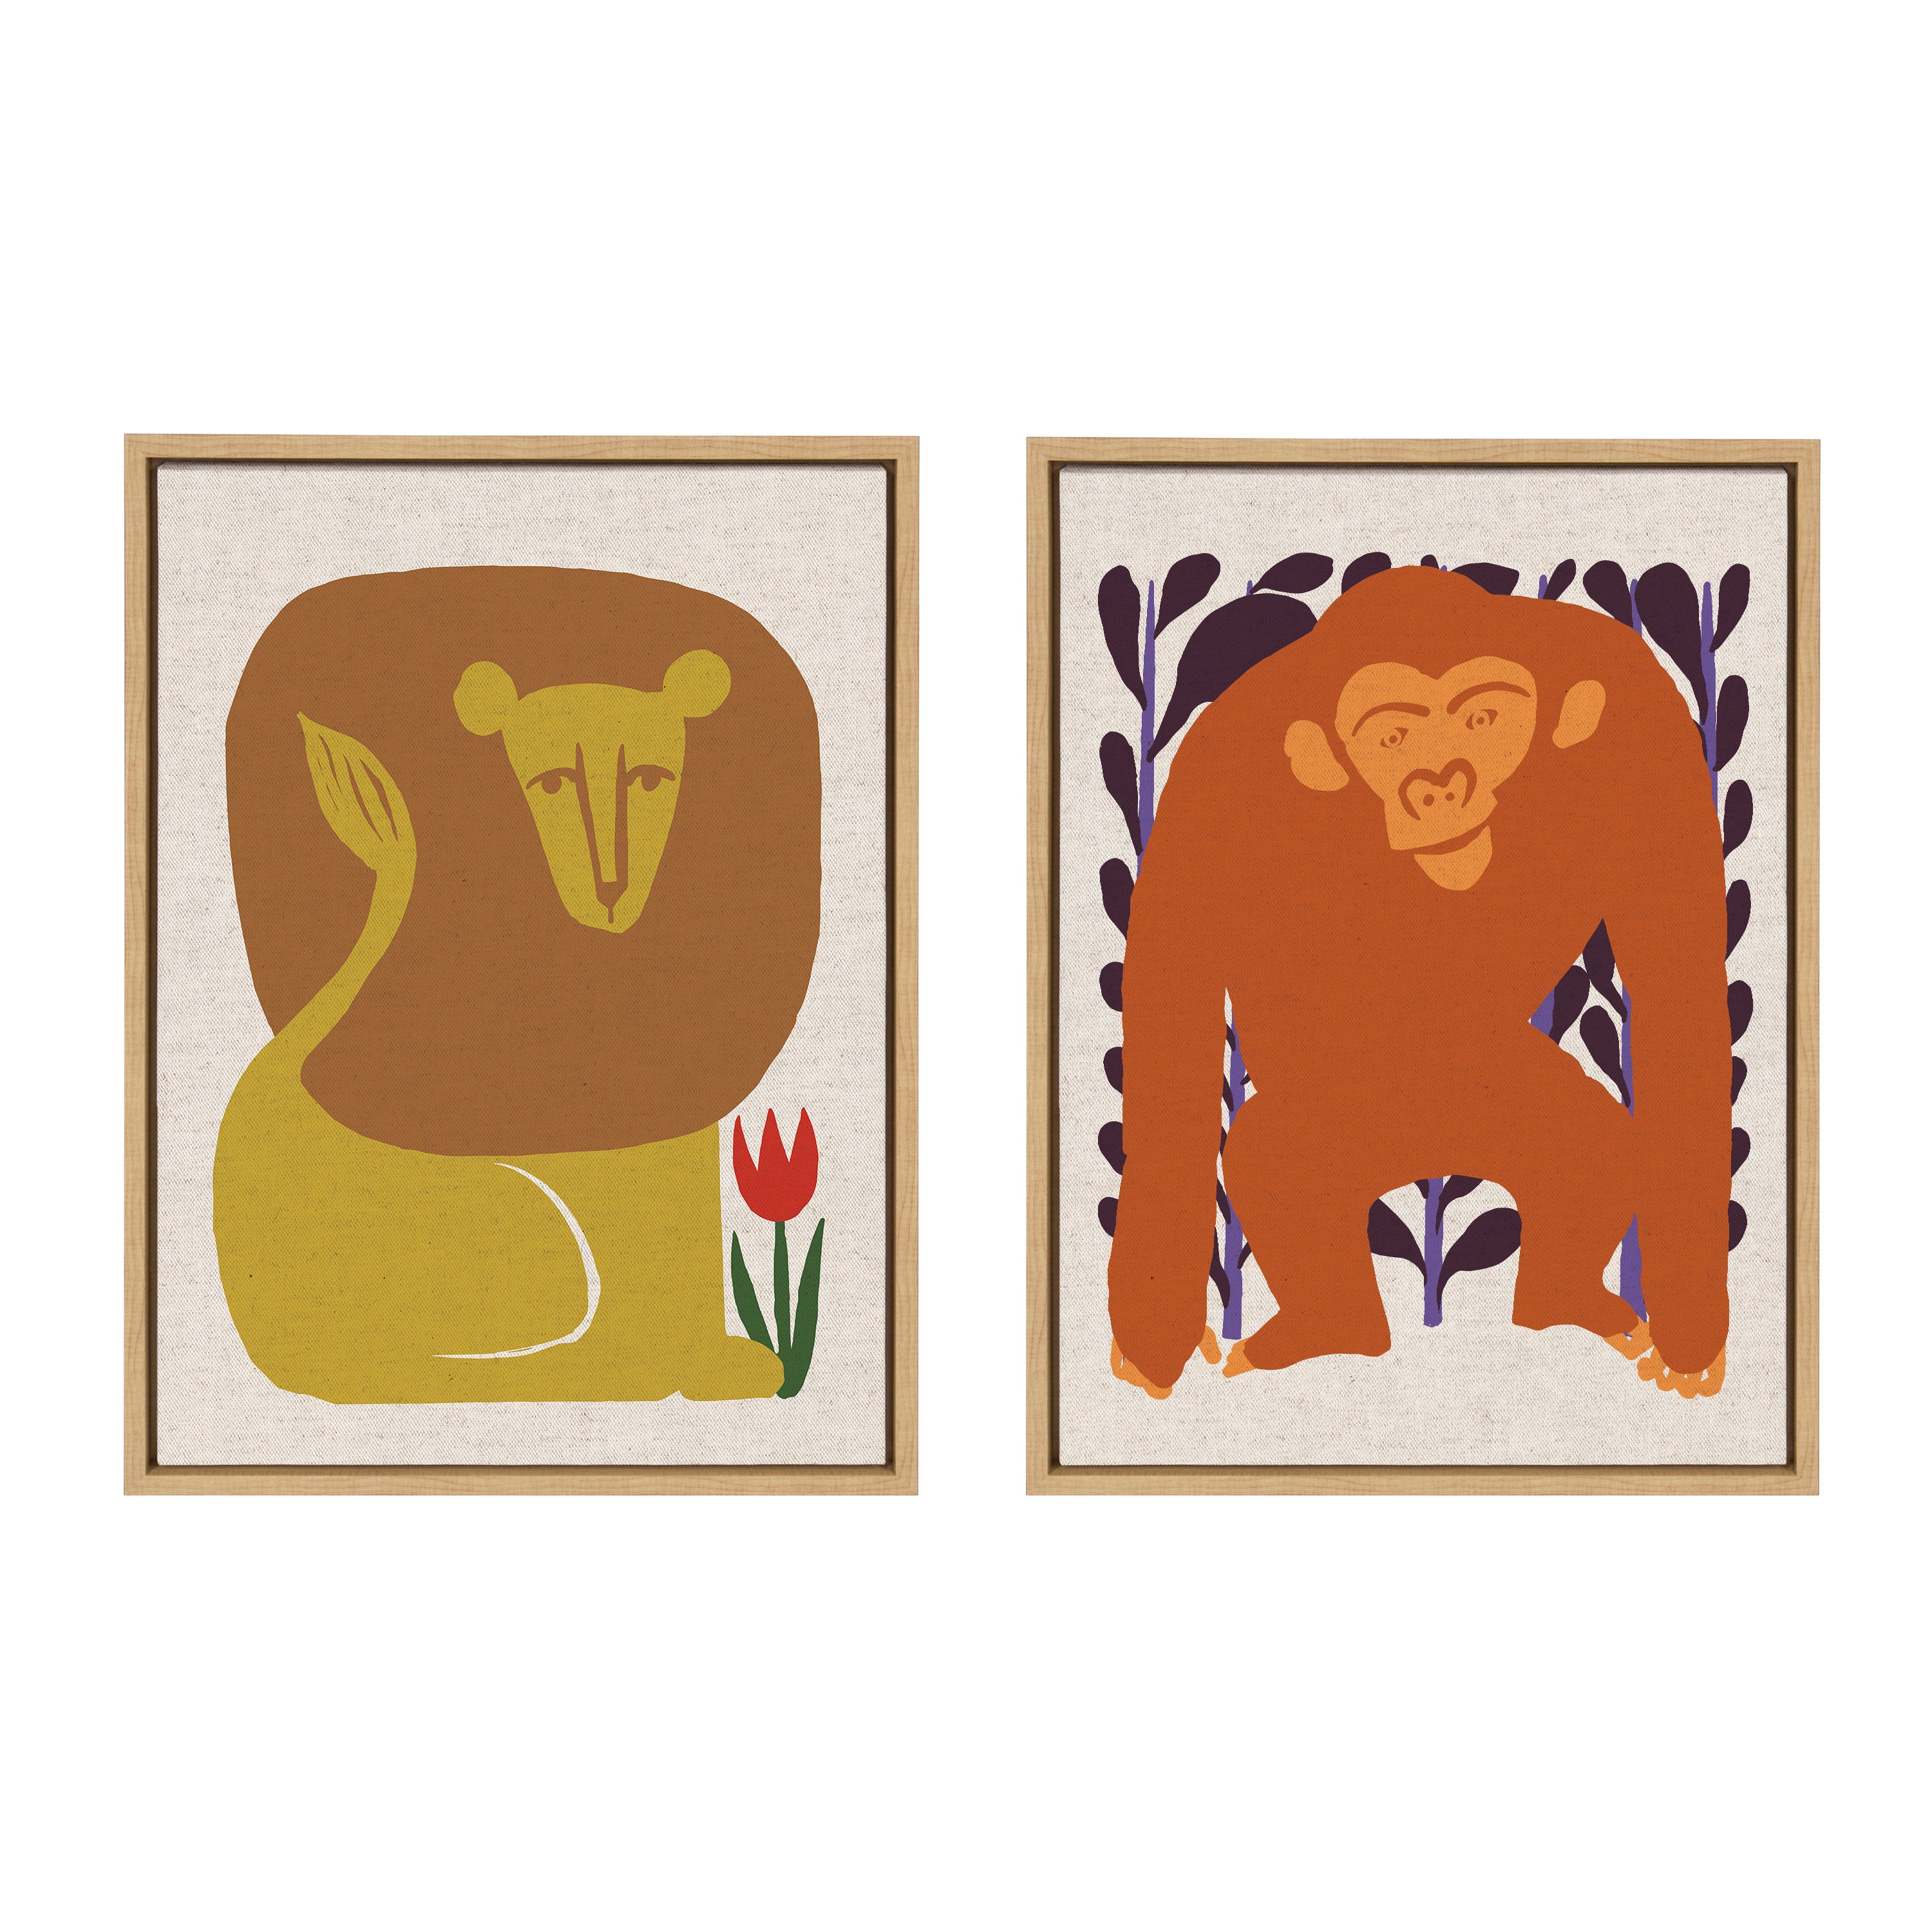 Sylvie HB Color Lion Neutral Linen Bright and HB Color Orang Neutral Linen Bright Framed Canvas Art Set by Hannah Beisang